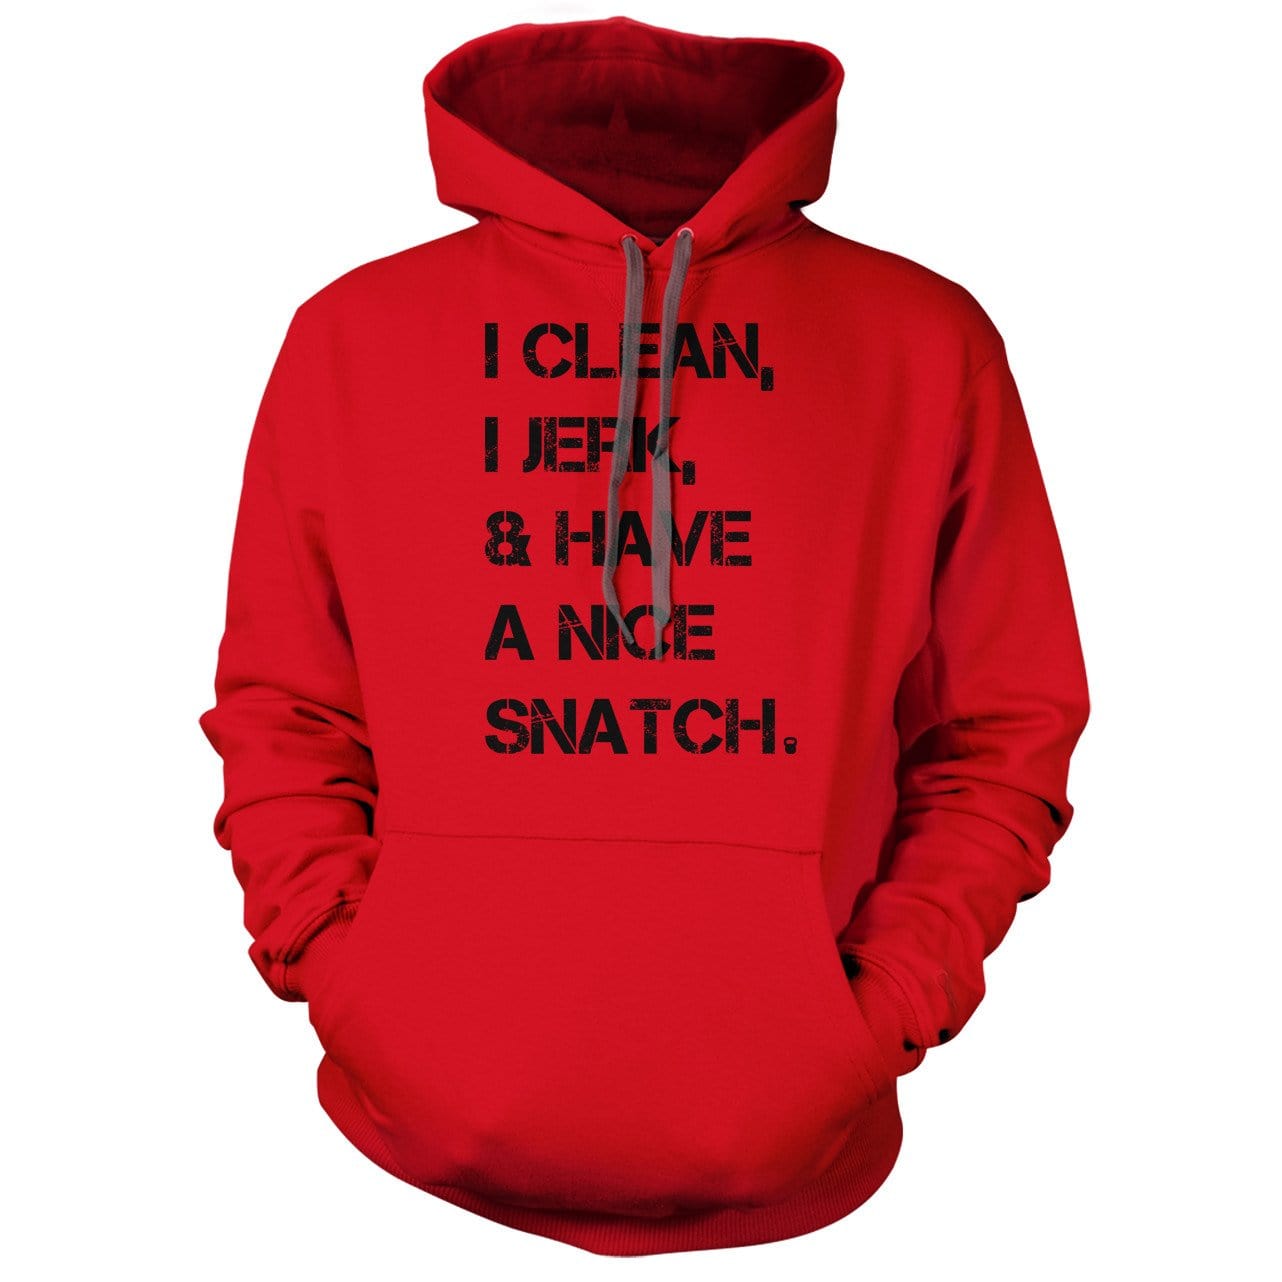 I Clean, I Jerk, & Have A Nice Snatch Red Hoodie - We Got Teez